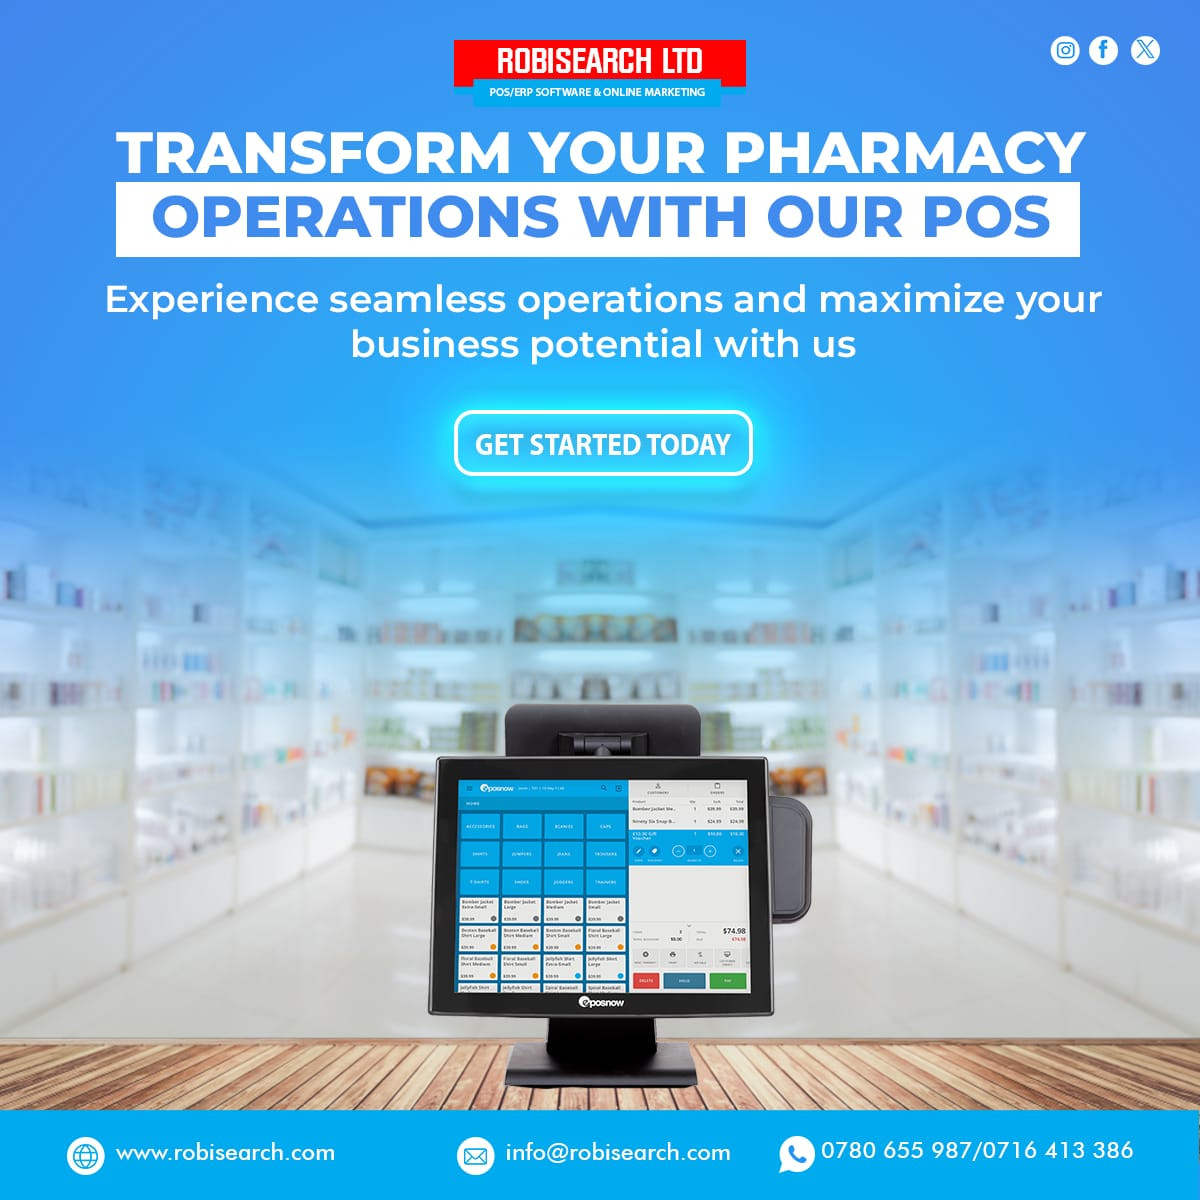 POINT OF SALE SYSTEM FOR PHARMACY STORE